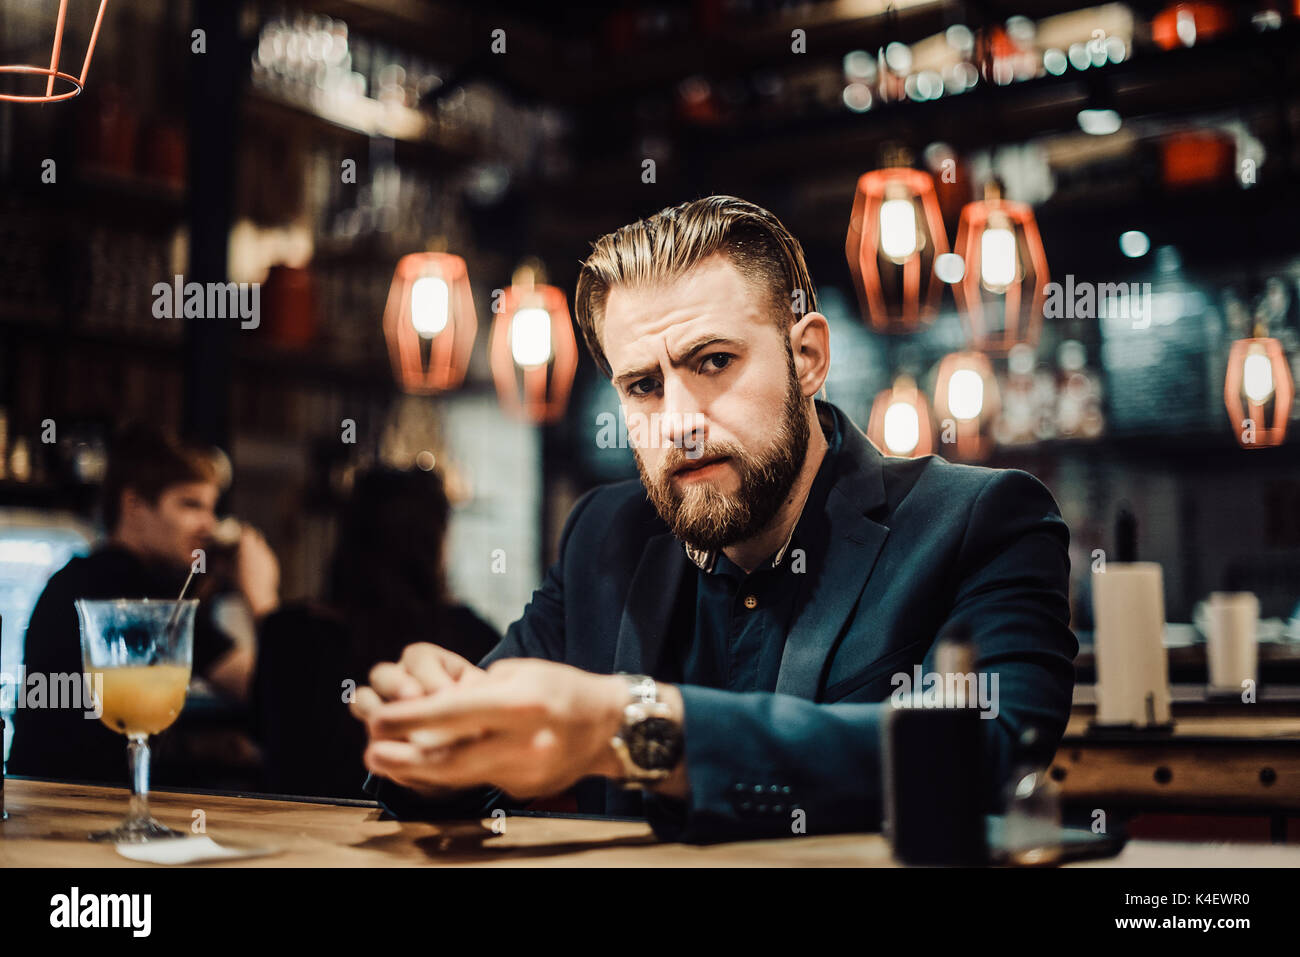 49/5000 bearded man in a suit with a telephone drinks something Stock Photo